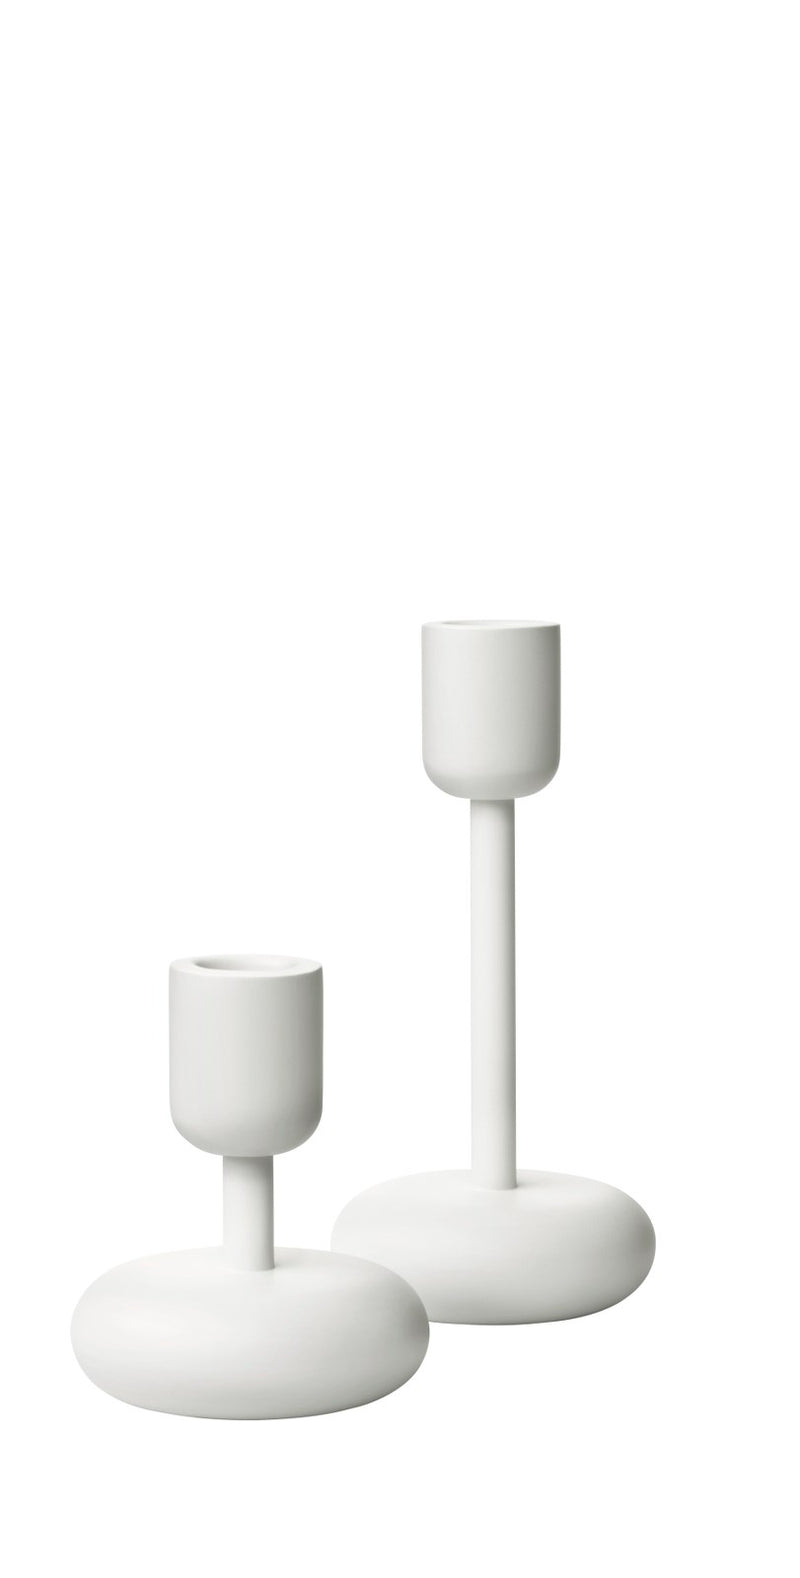 media image for Nappula Candleholder in Various Sizes & Colors design by Matti Klenell for Iittala 293